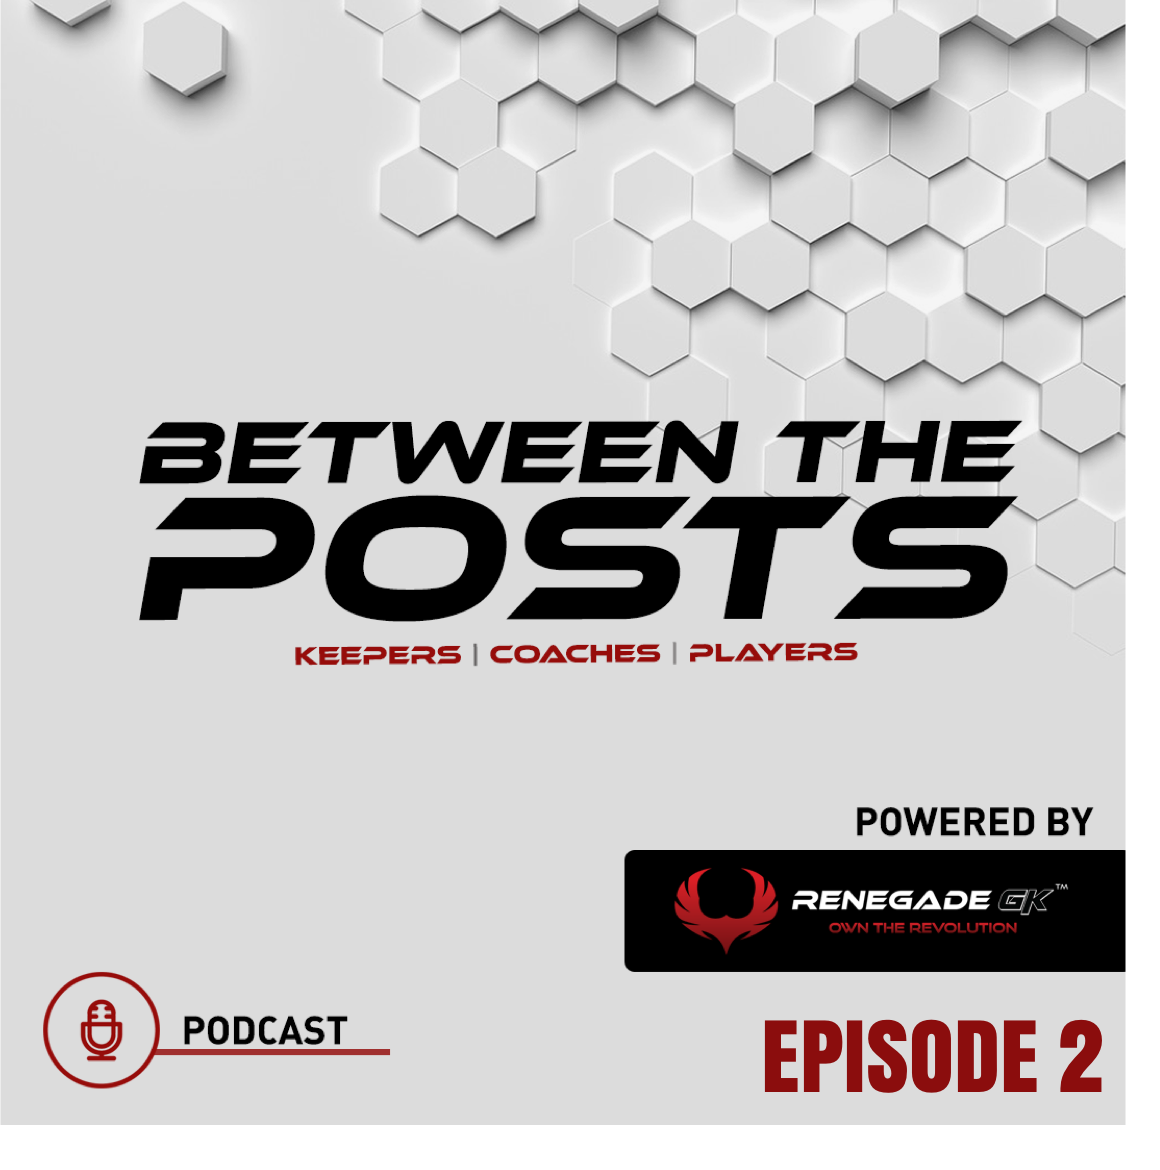 Between The Posts Ep. 2: How To Train Young Goalkeepers & Guidelines for Developing Youth Soccer Talent